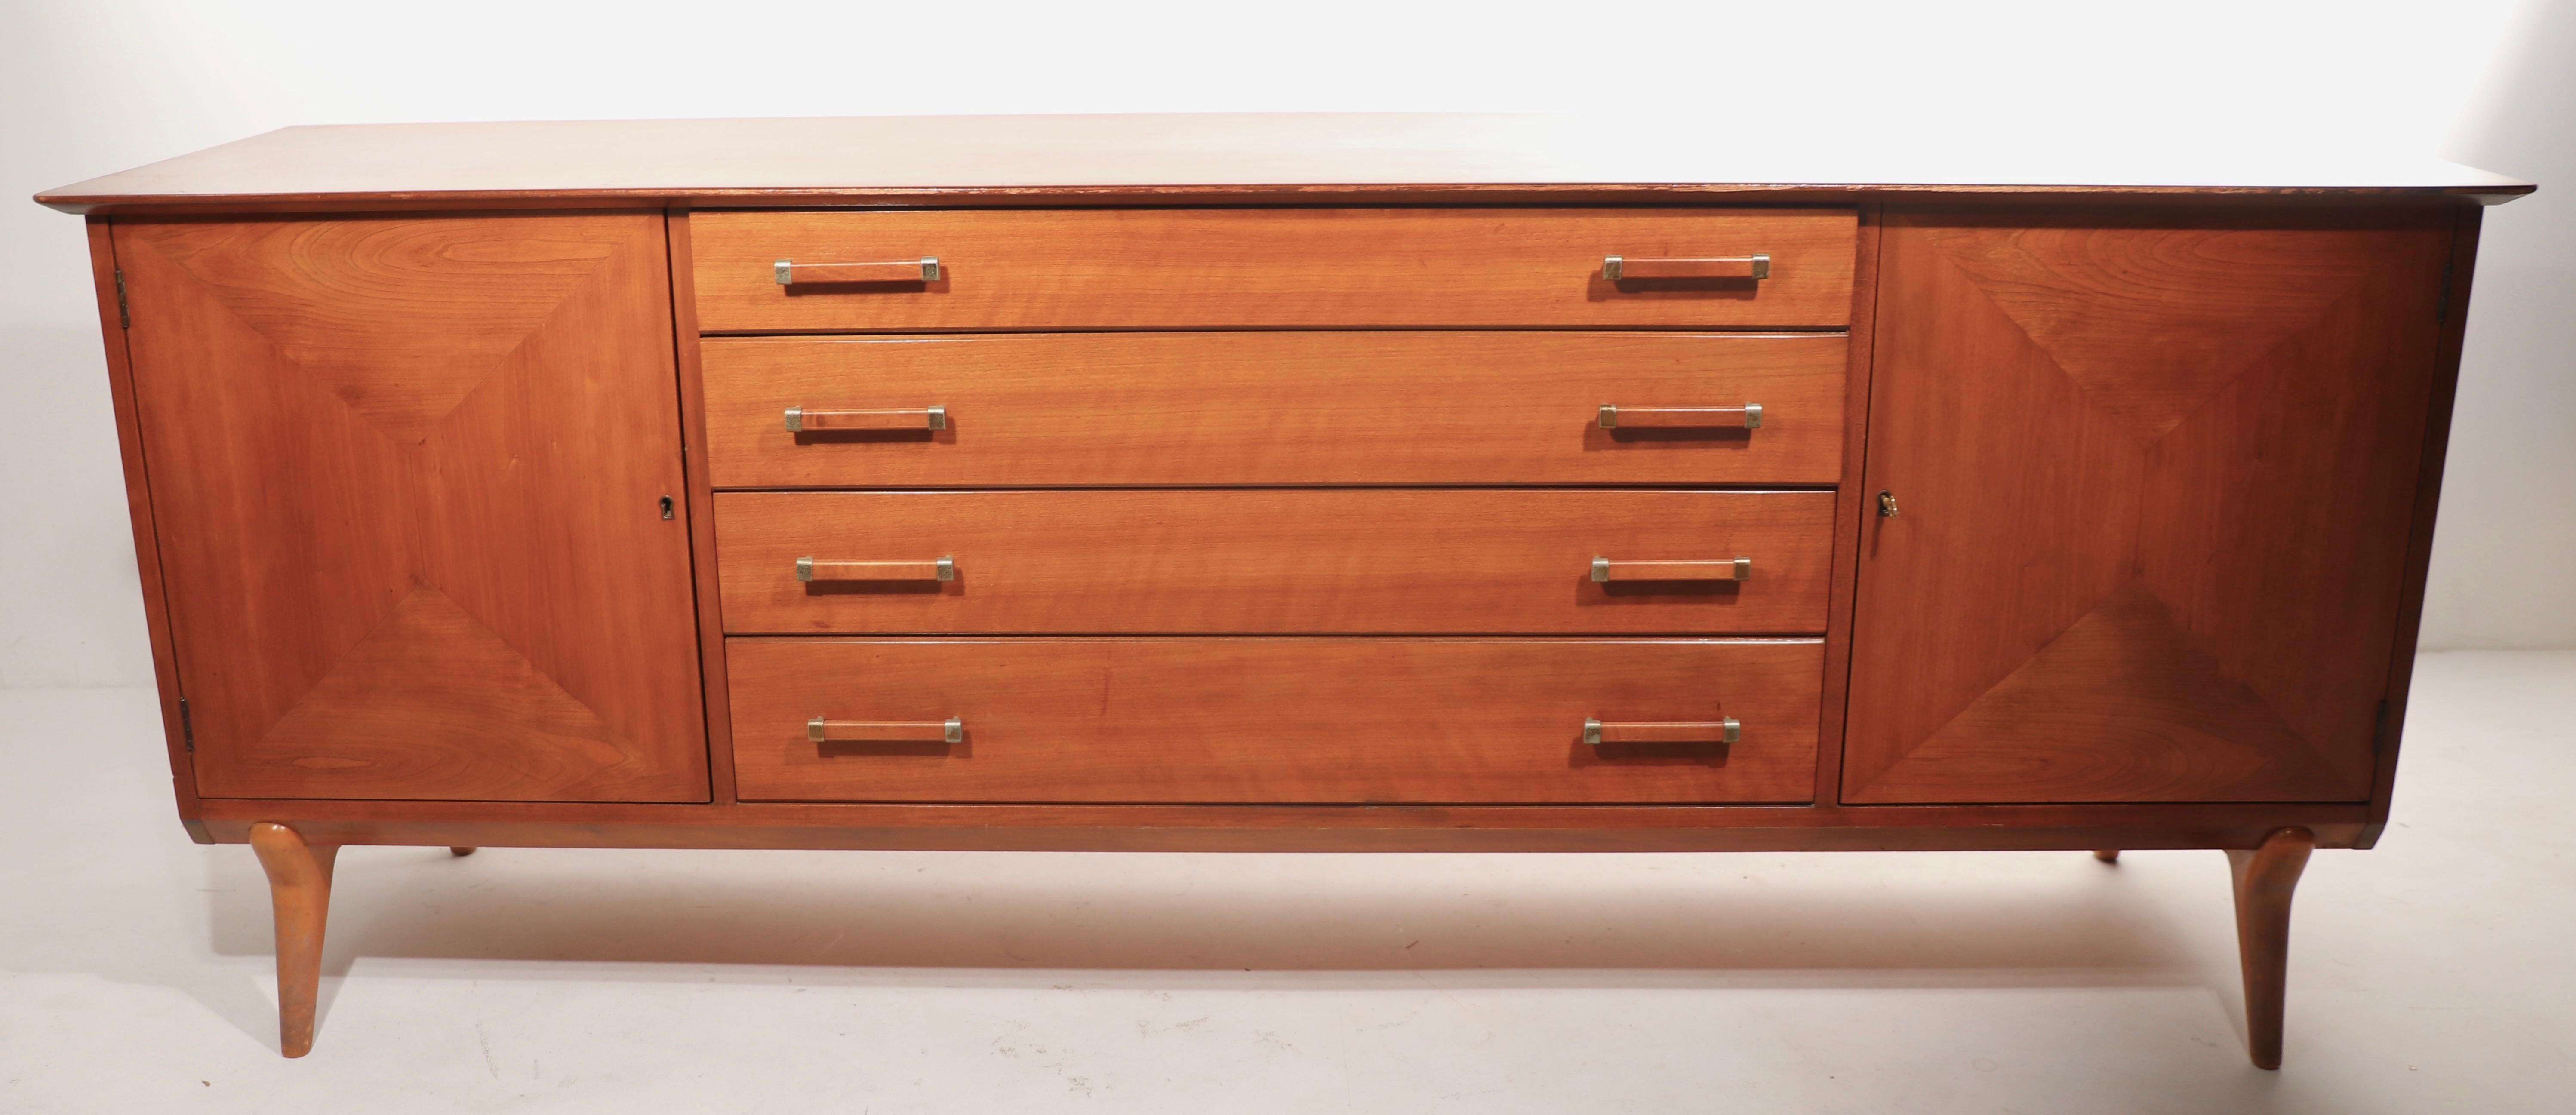 Exceptional Mid-Century Modern server, credenza, server, sideboard designed by Lorenzo Rutili, made by Johnston Furniture Company, retailed by John Stuart. The case has two doors, which swing open to reveal storage space, flanking four center